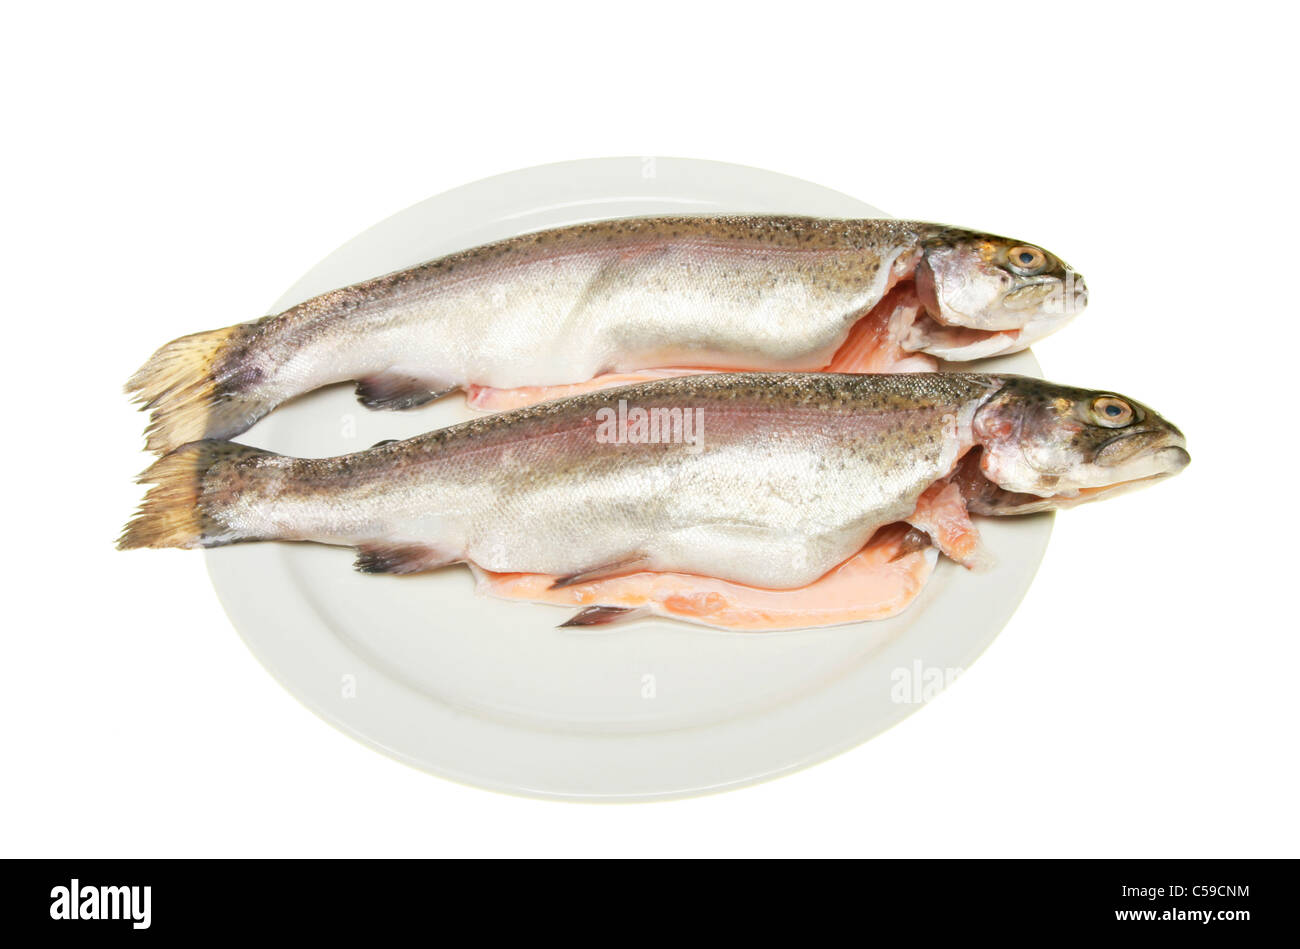 Two fresh rainbow trout on a plate isolated against white Stock Photo